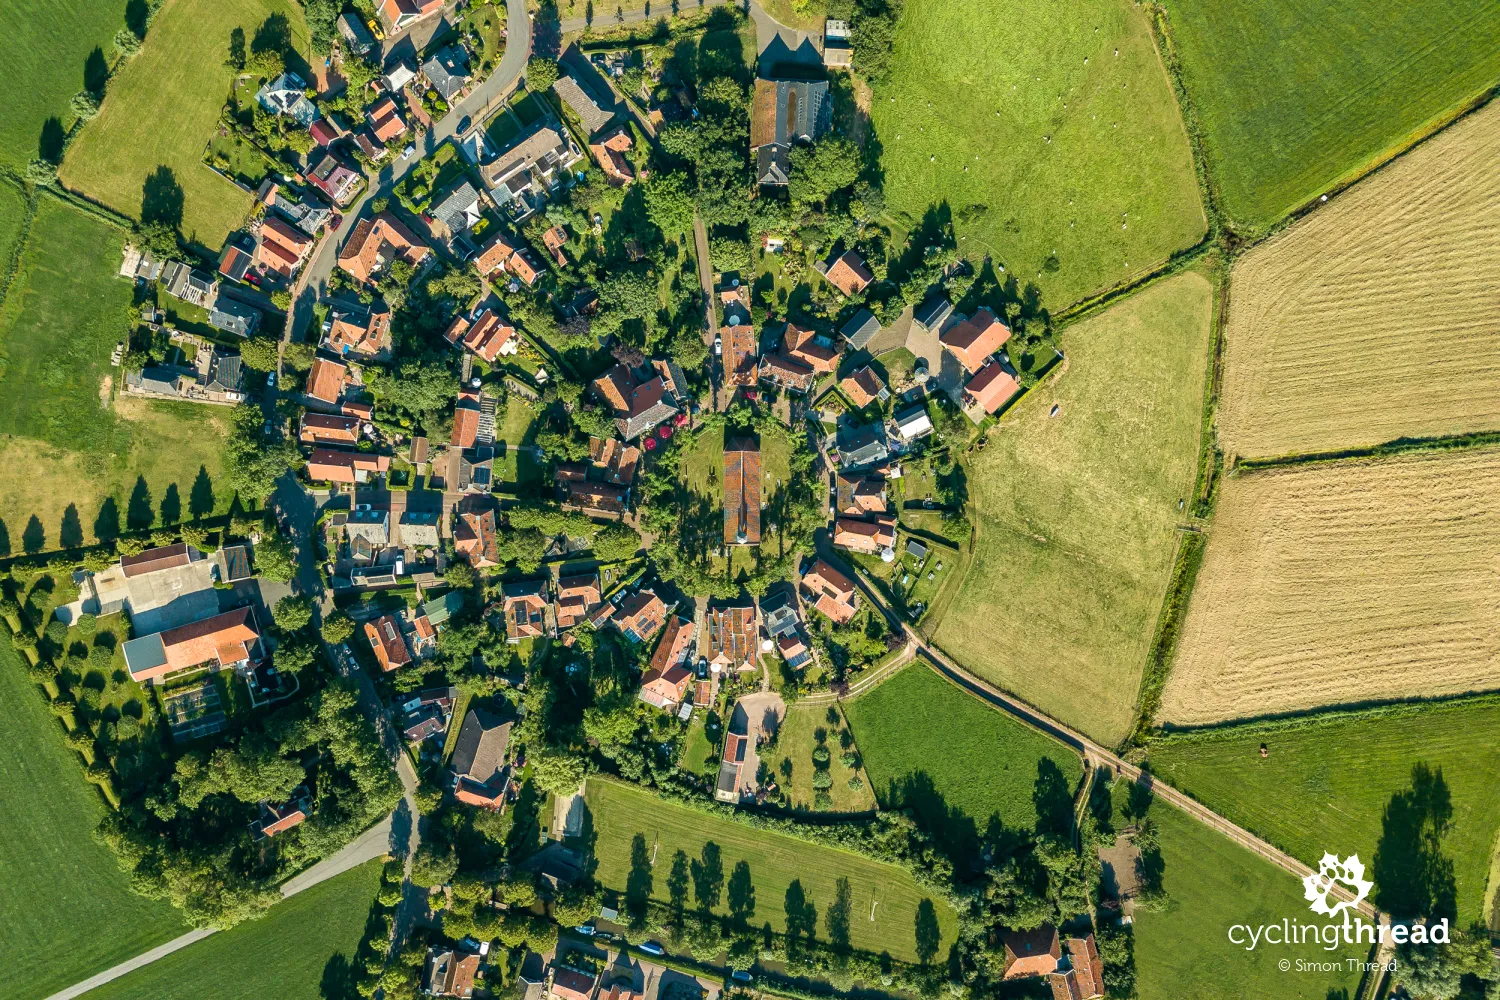 Niehove - a circular village in the Netherlands